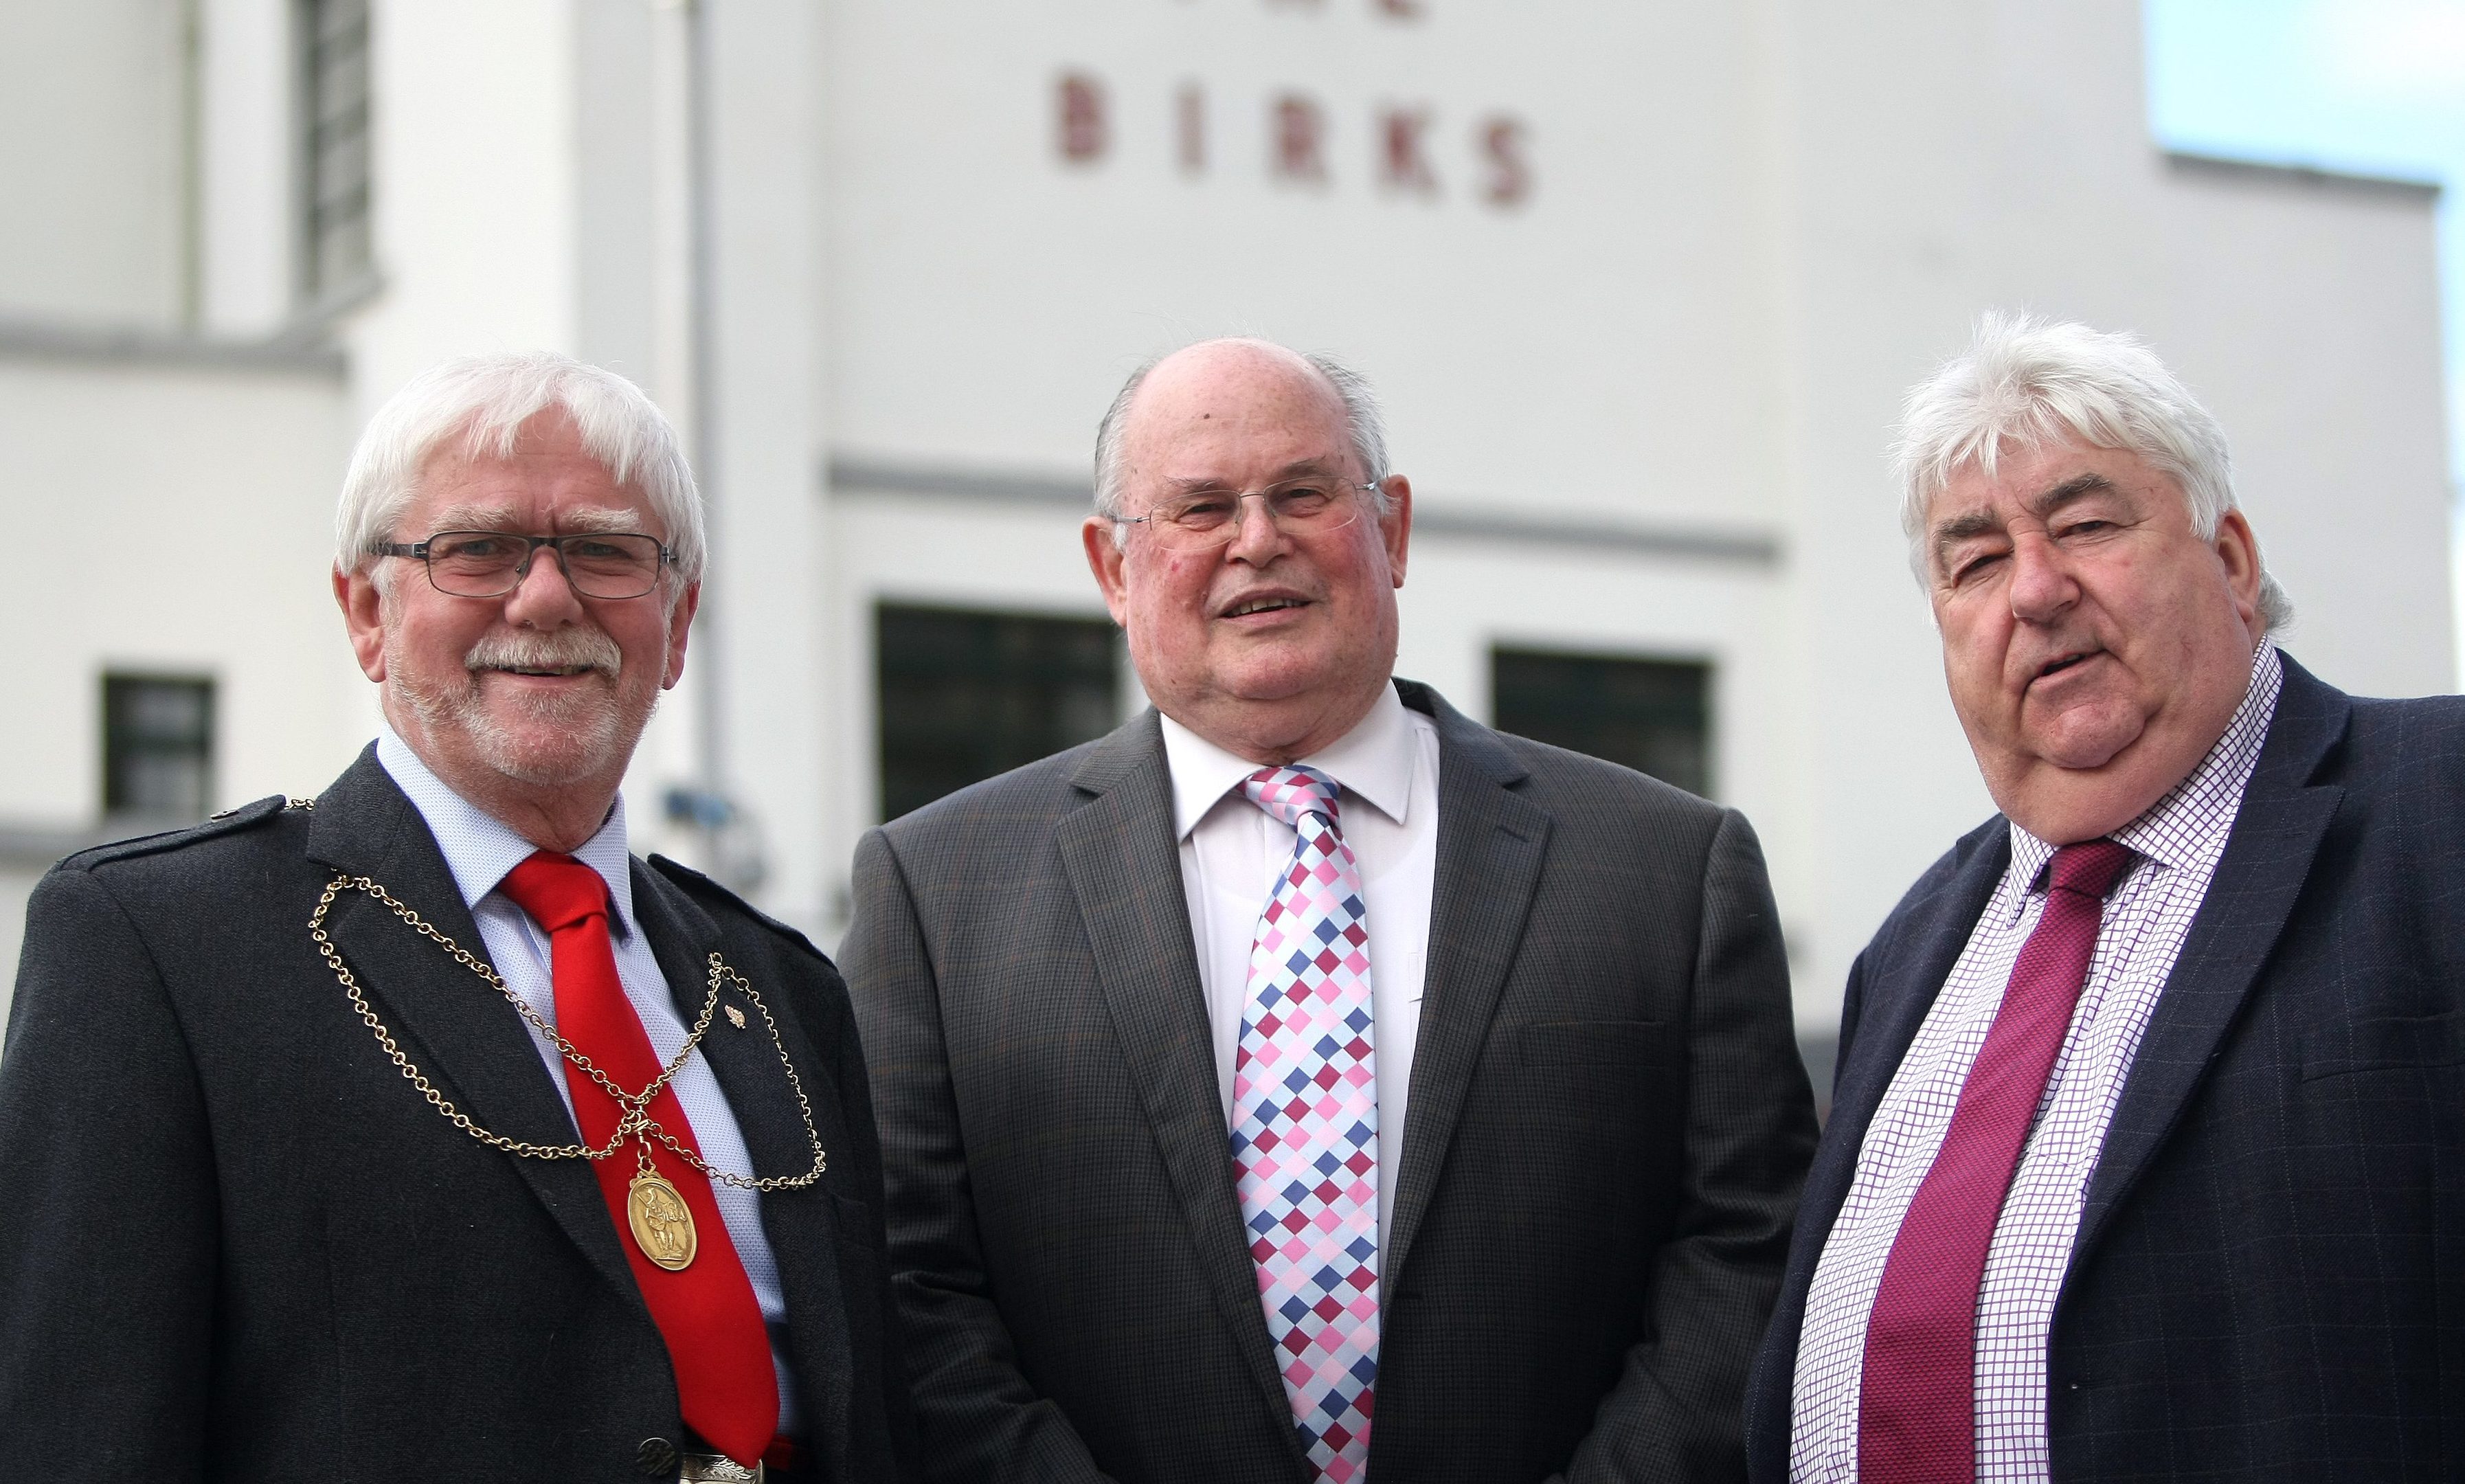 Provost of Perth and Kinross, Dennis Malloy, Mayor of Bland, Tony Lord and Ian Campbell, Leader of Perth and Kinross Council.